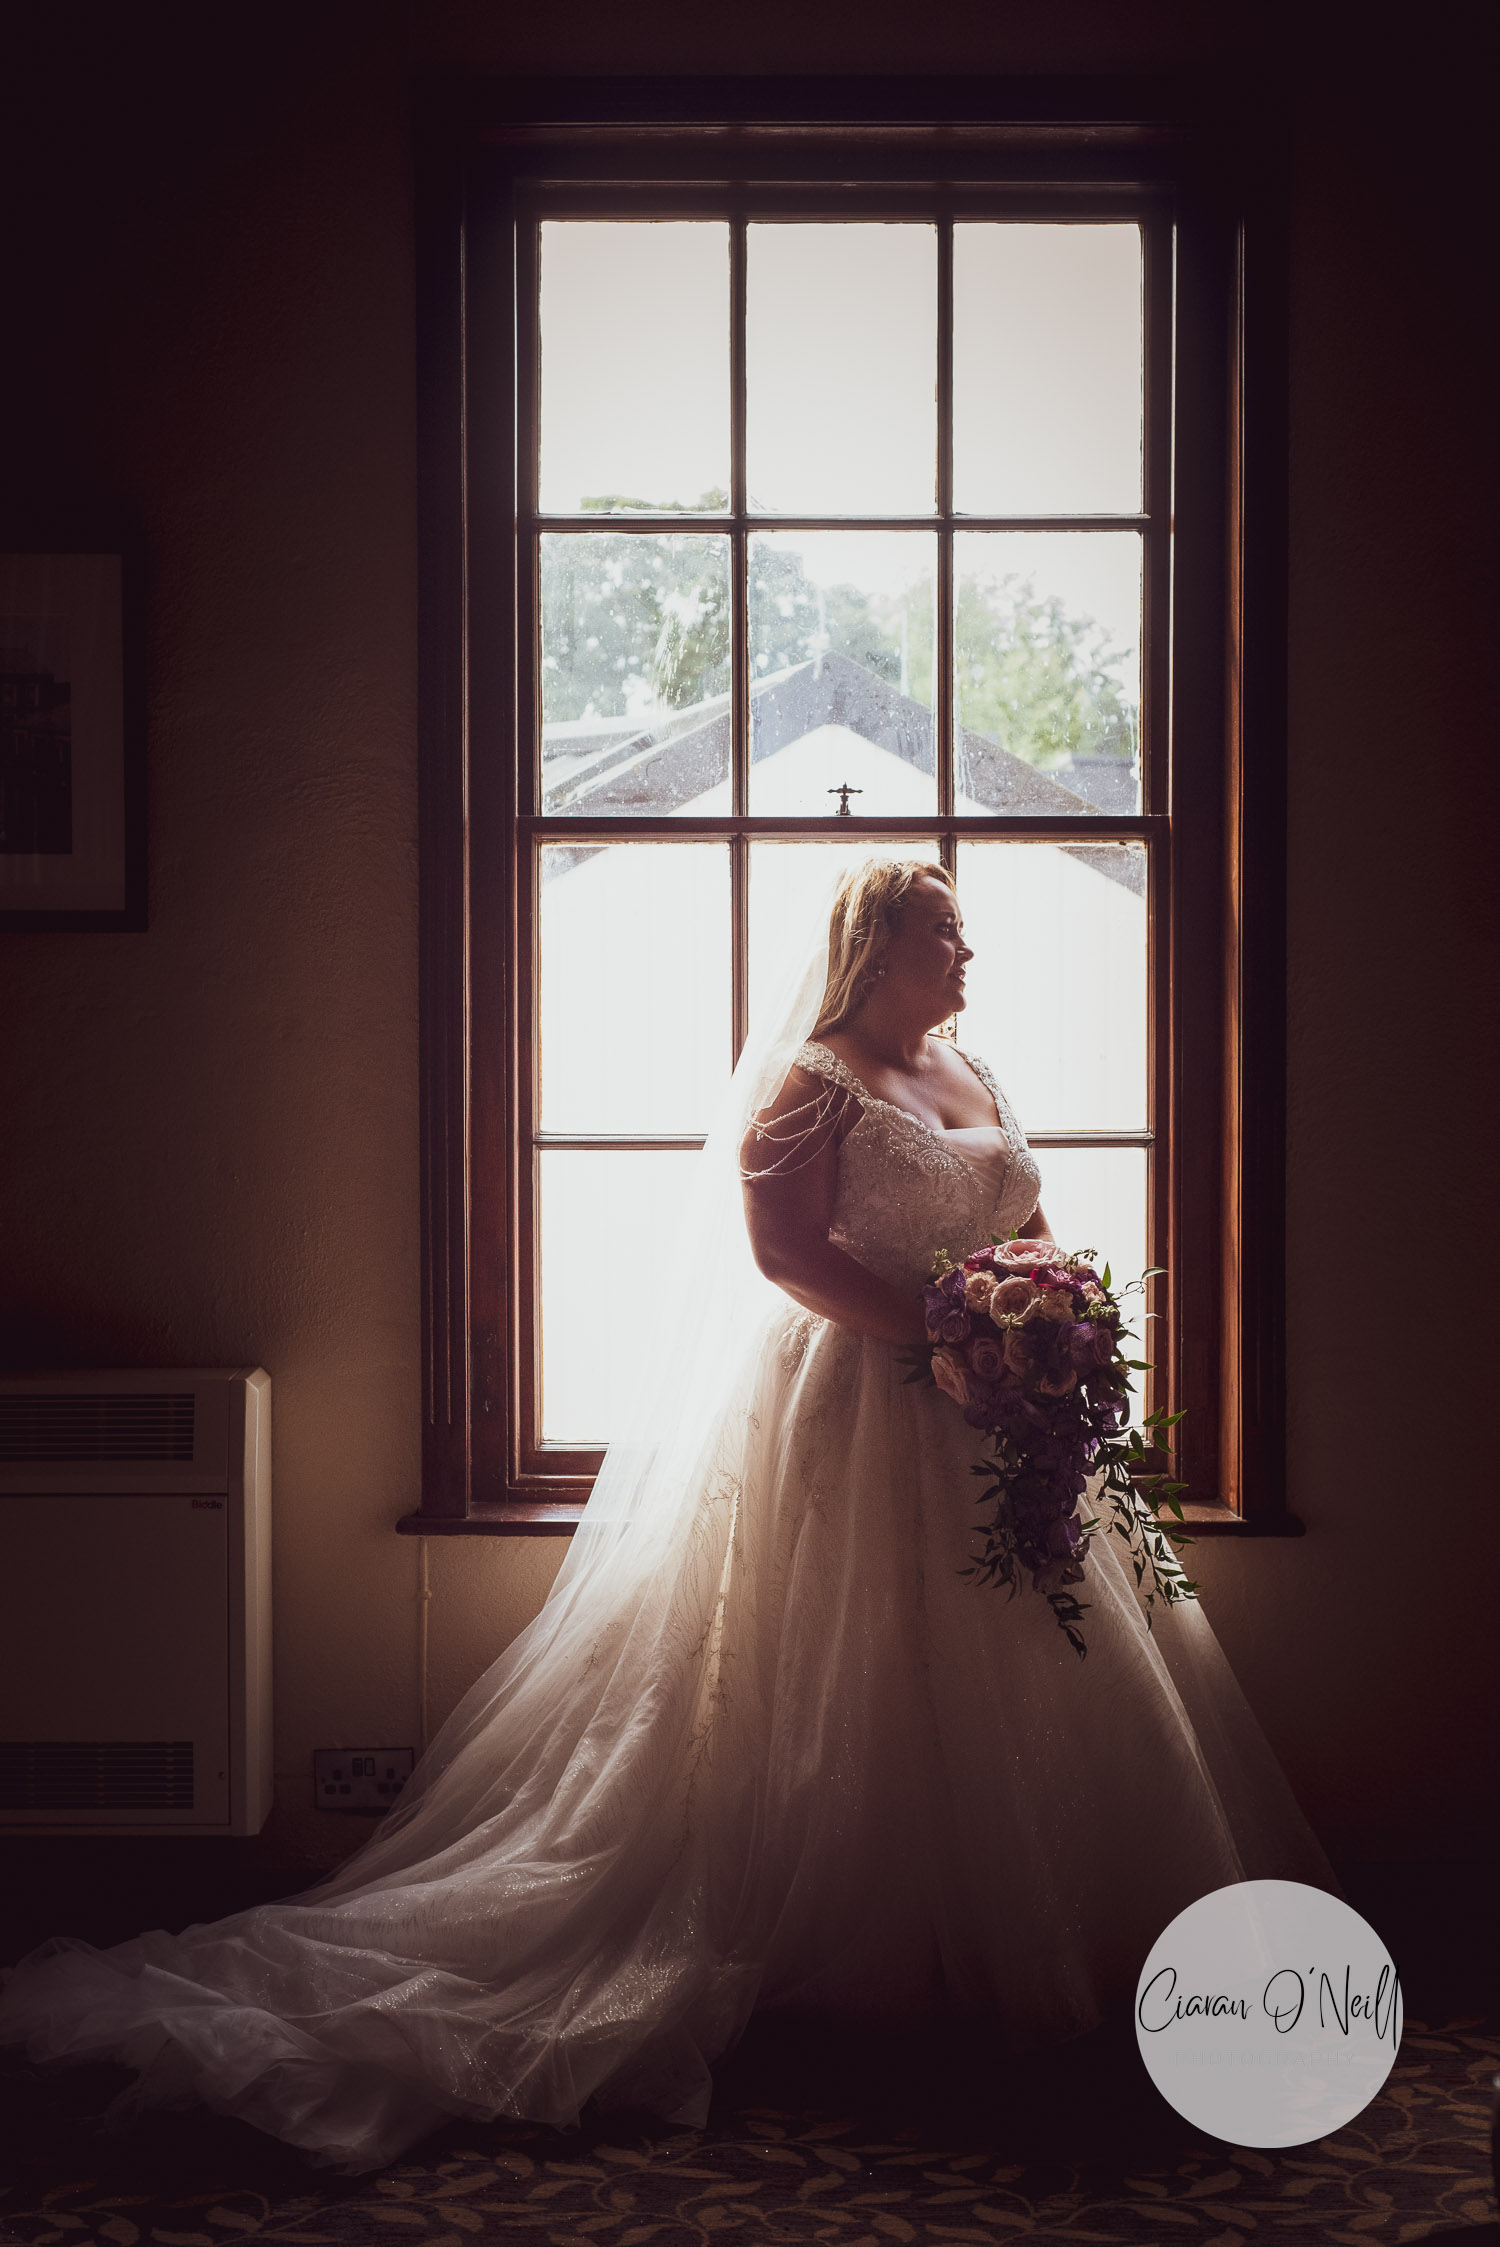 Claire standing, silhouetted by the window